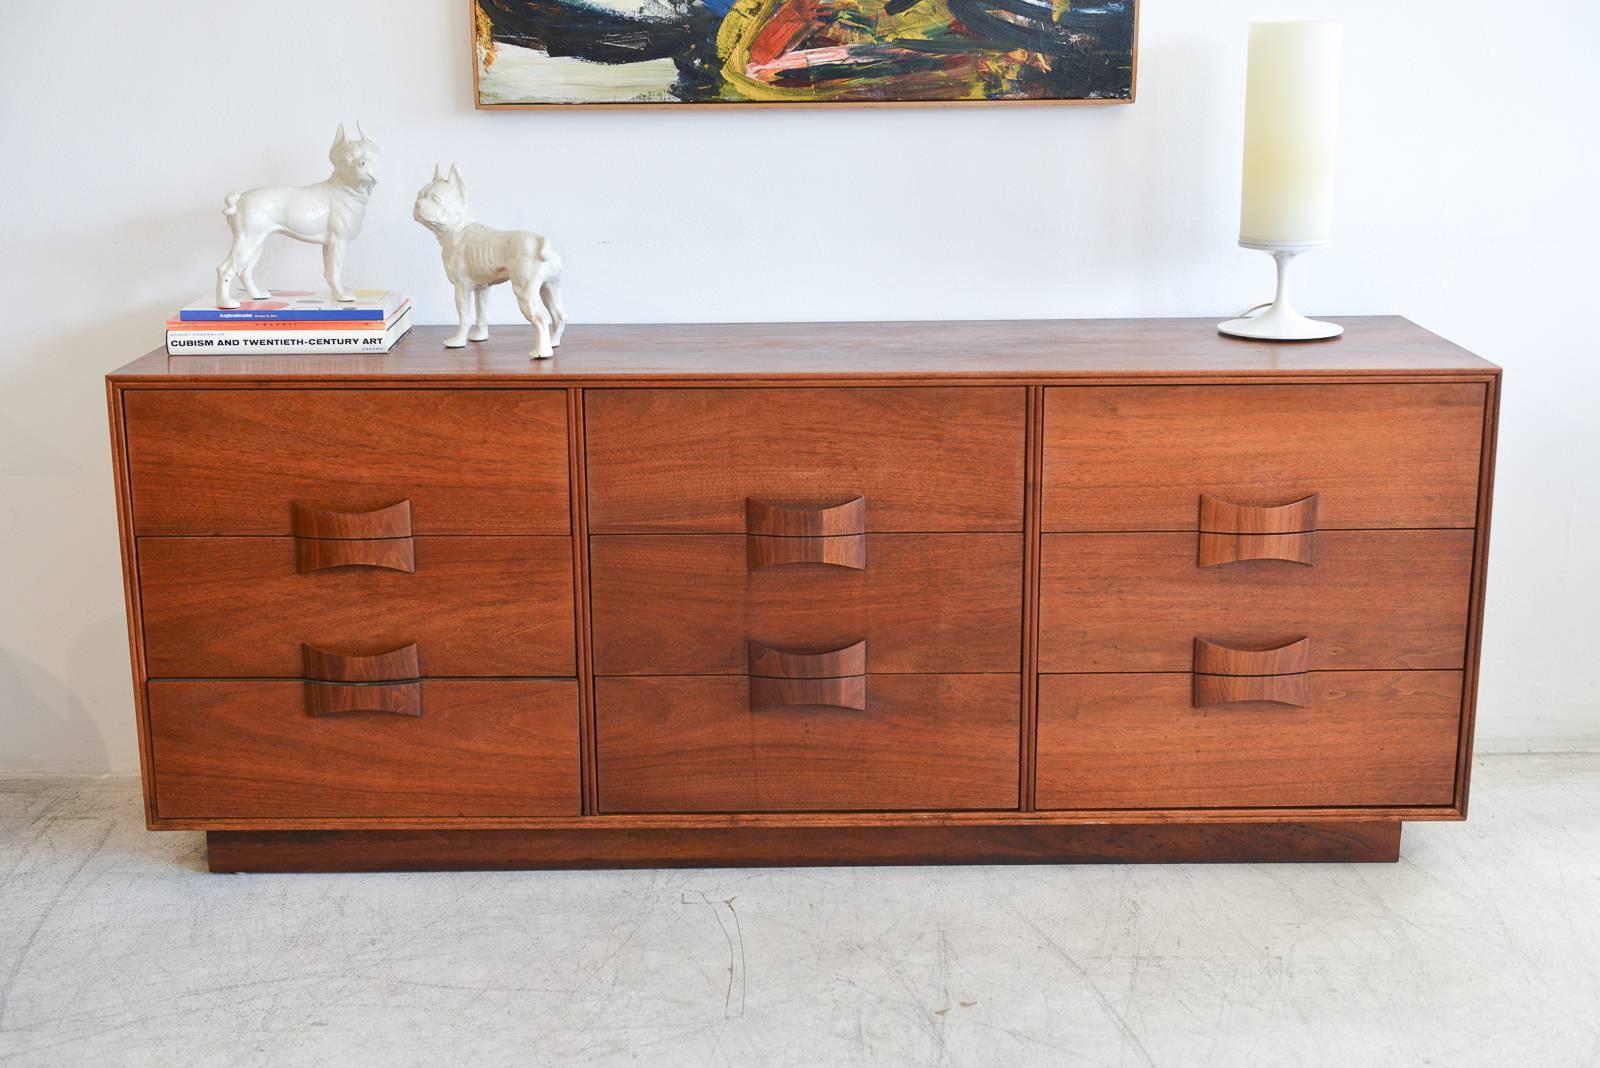 Walnut Bowtie Front Dresser or Credenza by Brown Saltman. Beautiful walnut grain on platform base.

Very good condition, see photos for details. Matching side tables also available in separate listing.

Measures 72